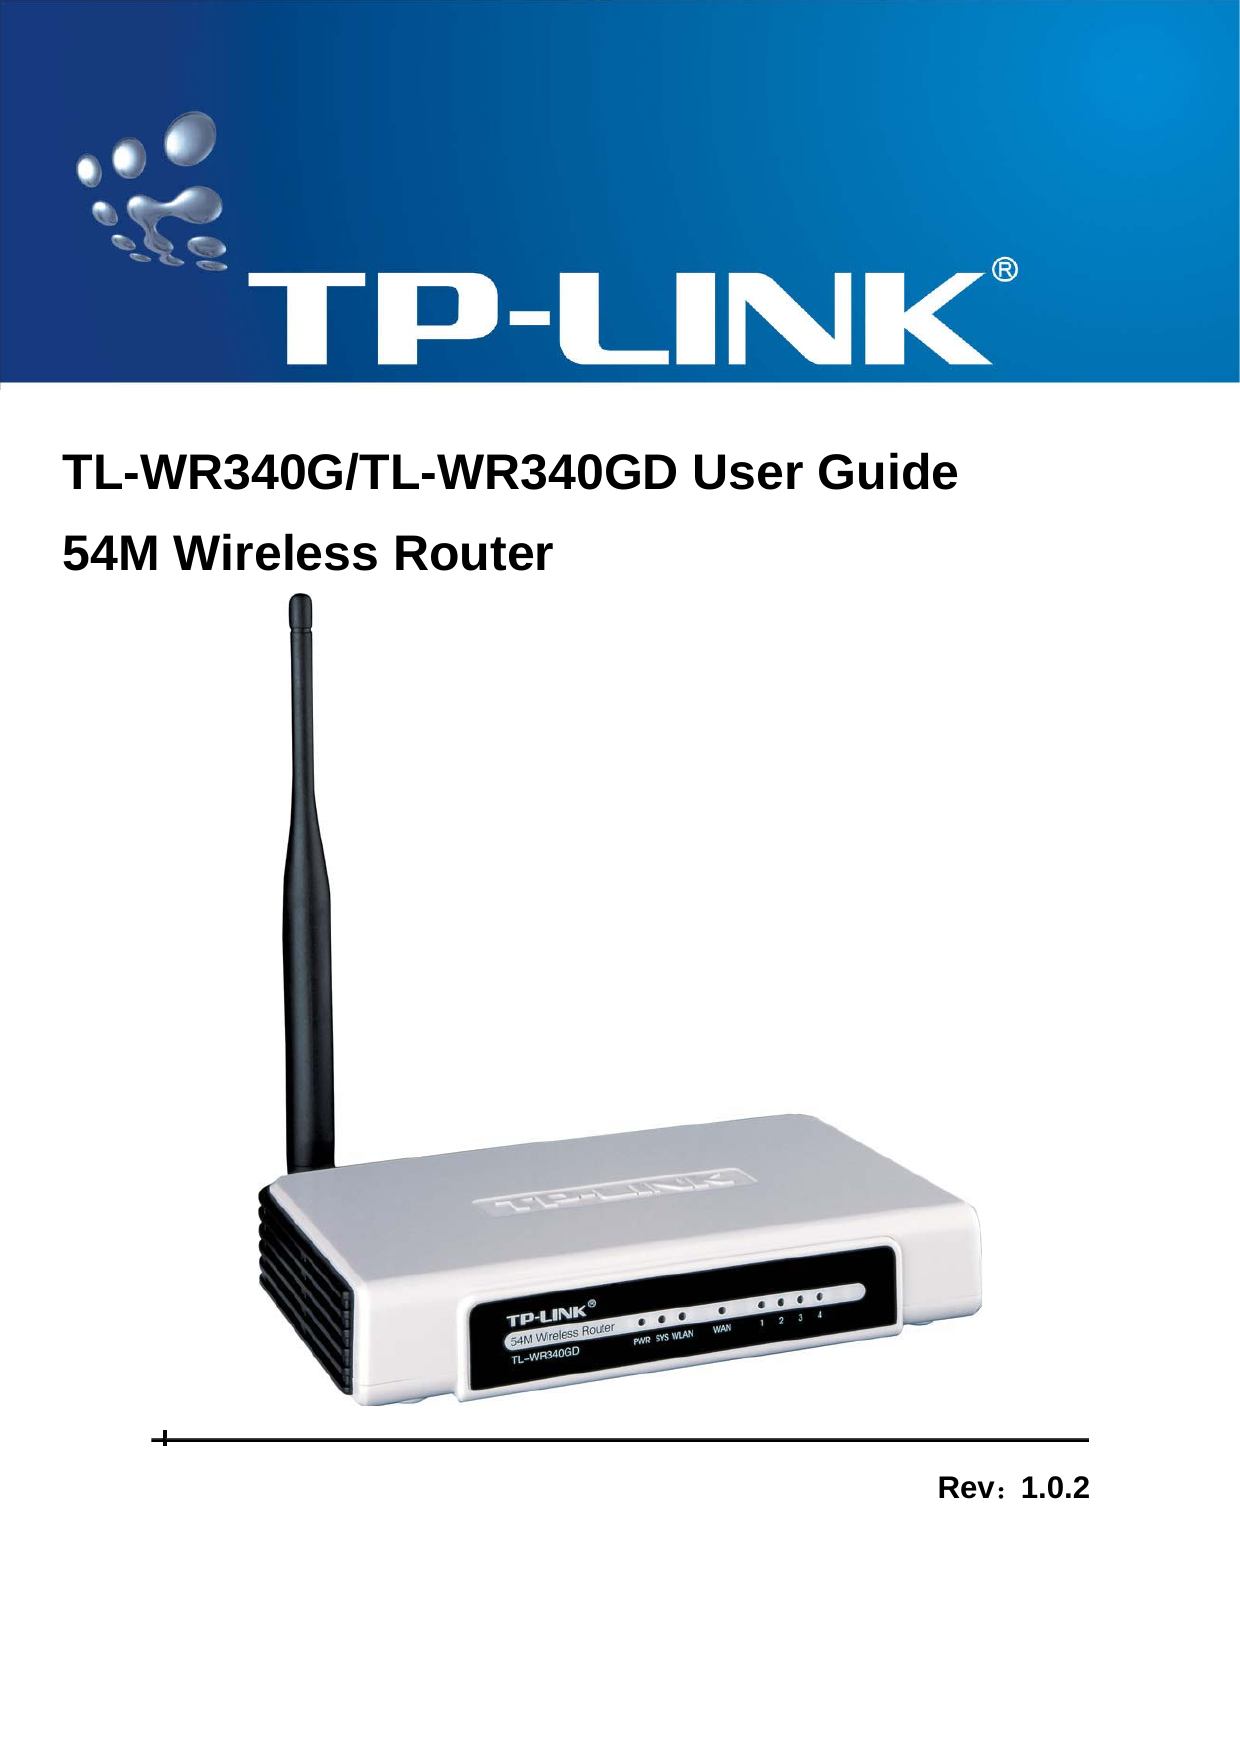   TL-WR340G/TL-WR340GD User Guide 54M Wireless Router    Rev：1.0.2